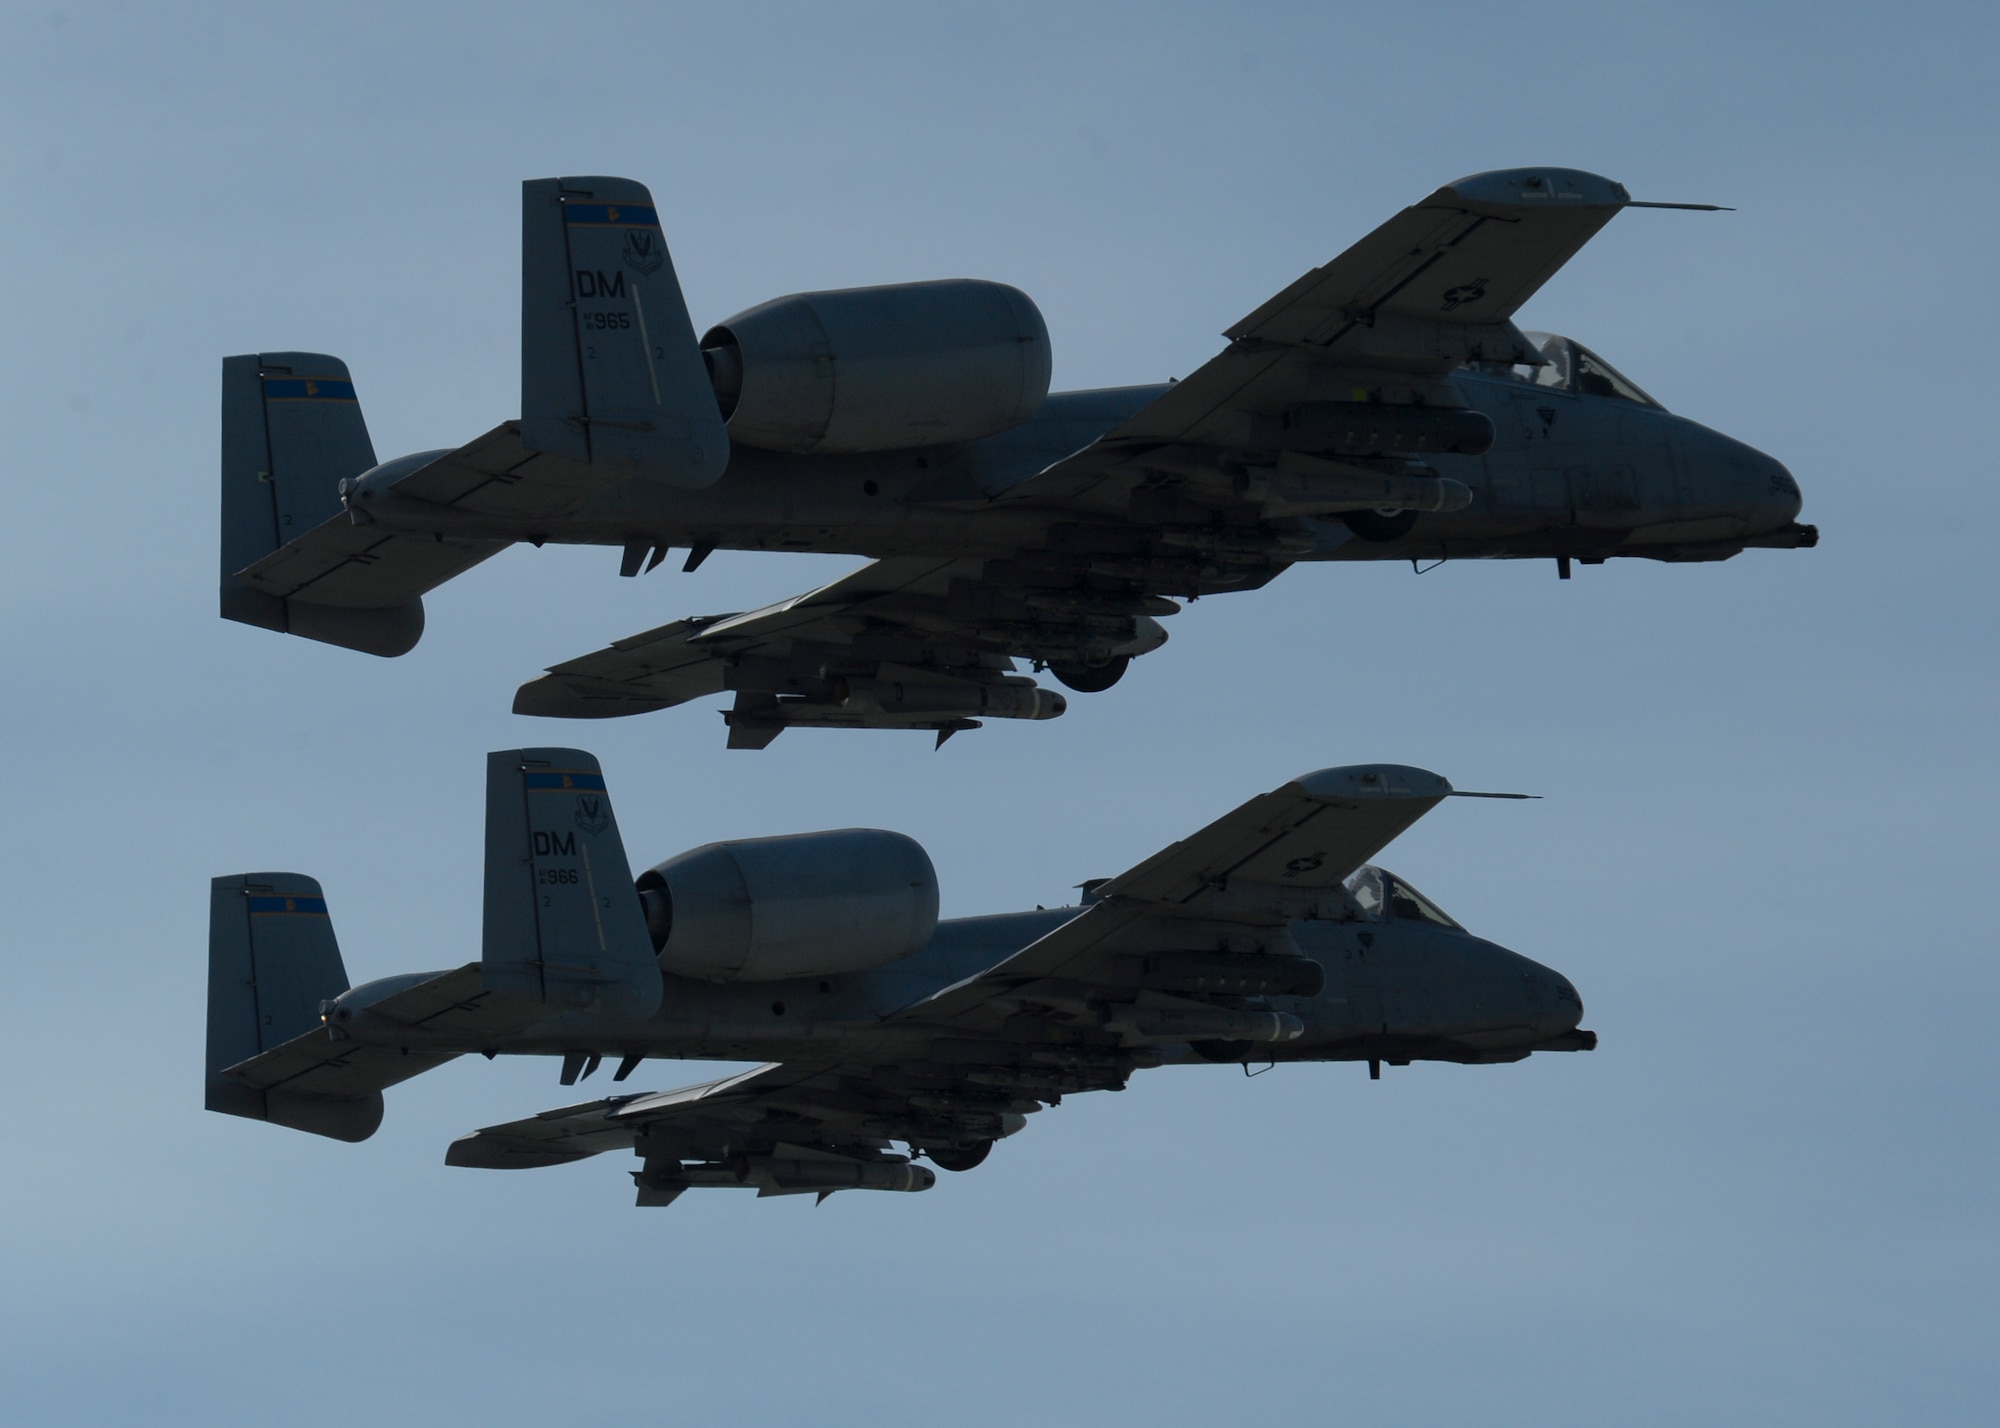 Two U.S. Air Force A-10 Thunderbolt II aircraft assigned to the 354th Expeditionary Fighter Squadron take off from a runway during a theater security package deployment at Campia Turzii, Romania, April 14, 2015.The aircraft deployed to Romania in support of Operation Atlantic Resolve to bolster air power capabilities while underscoring the U.S. commitment to European security and stability. (U.S. Air Force photo by Staff Sgt. Joe W. McFadden/Released) 